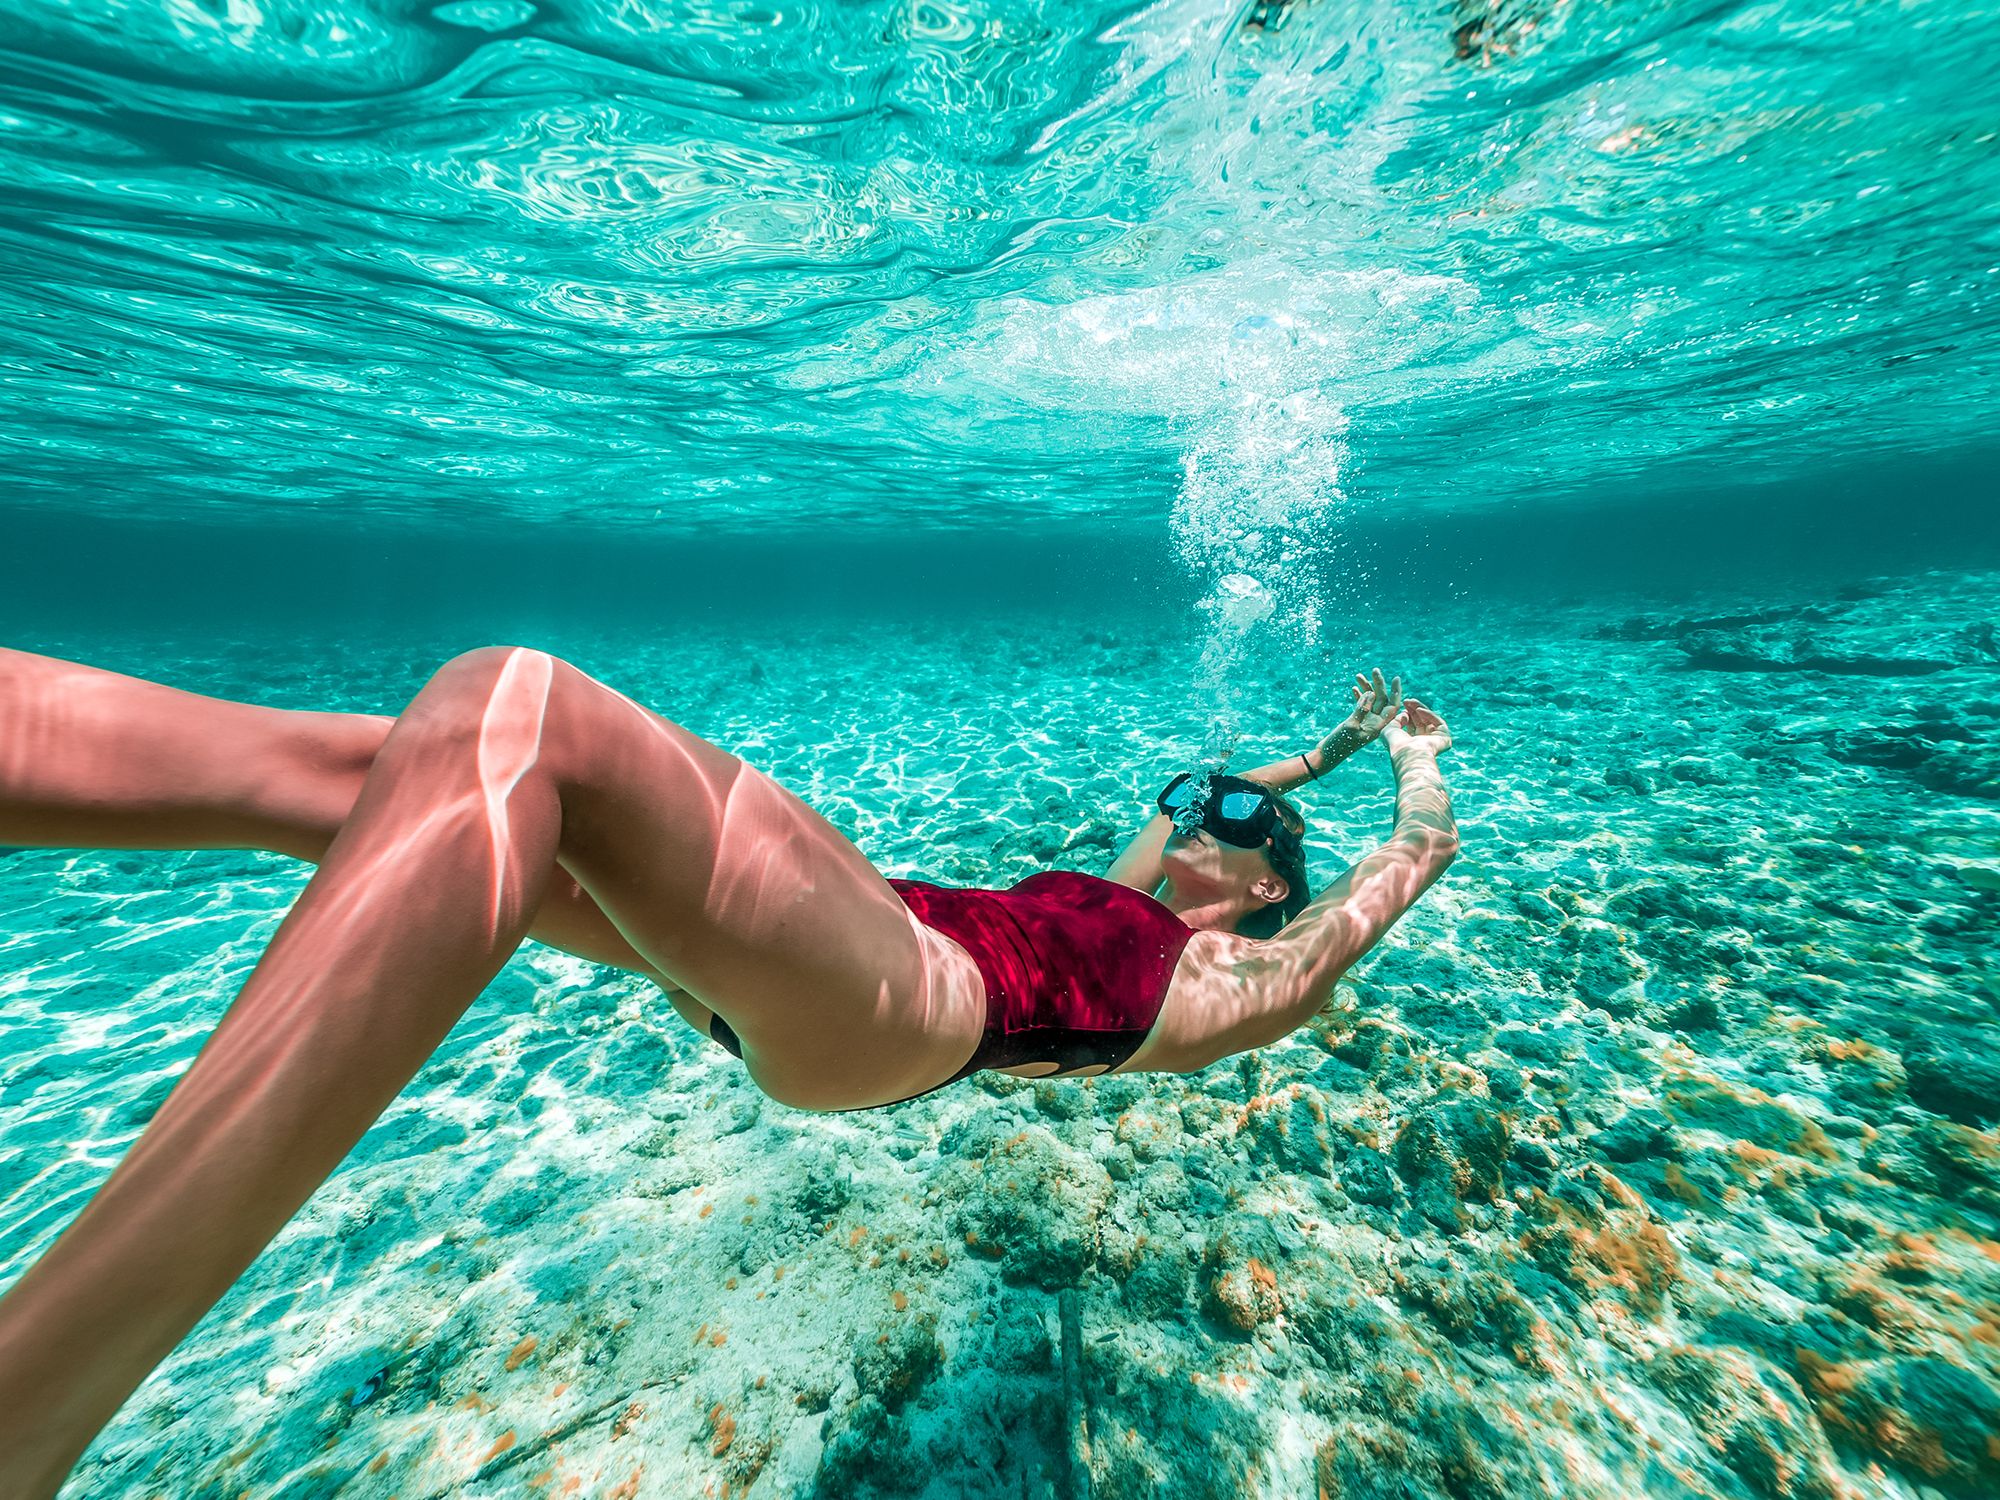 The Best Snorkeling In The Caribbean For An Exceptional Underwater Adventure!